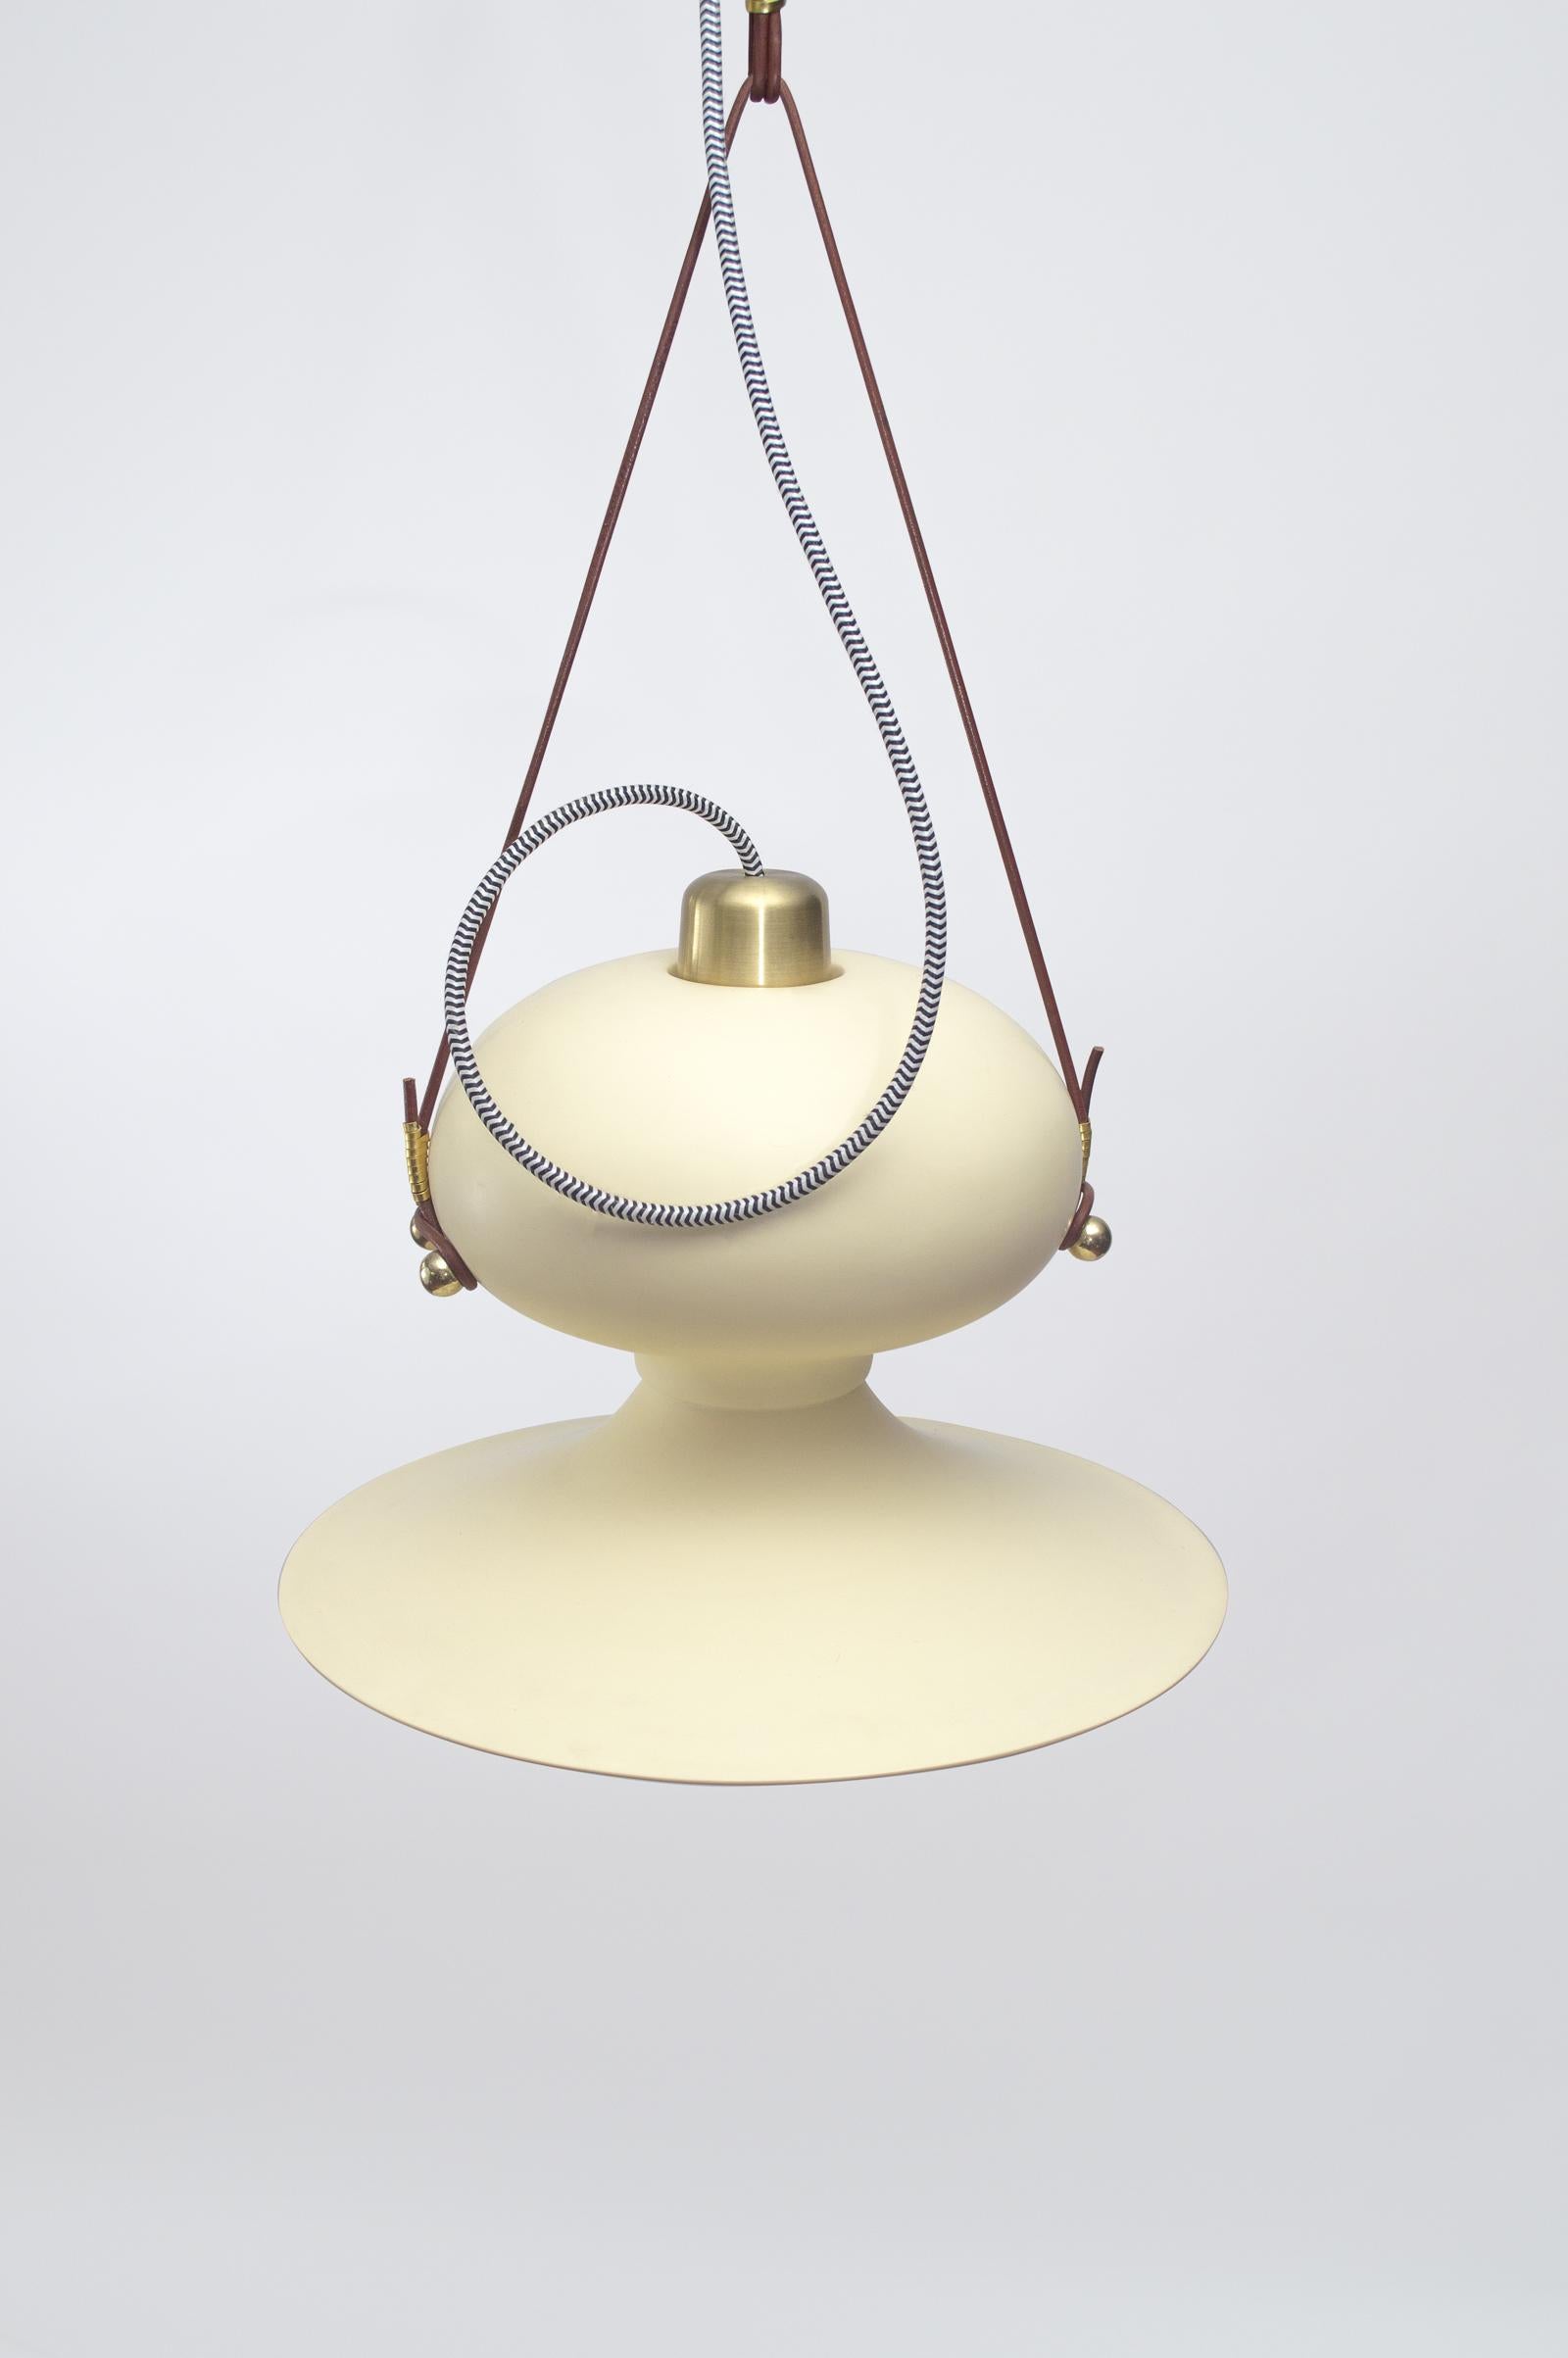 Ovoide n.° 3 is a hanging light, the result of the geometric and material exploration found in ACOOCOORO's signature lighting pieces, combining and playing with the voluminous and the soft, the futuristic and the
nostalgic. The resin pendant hangs